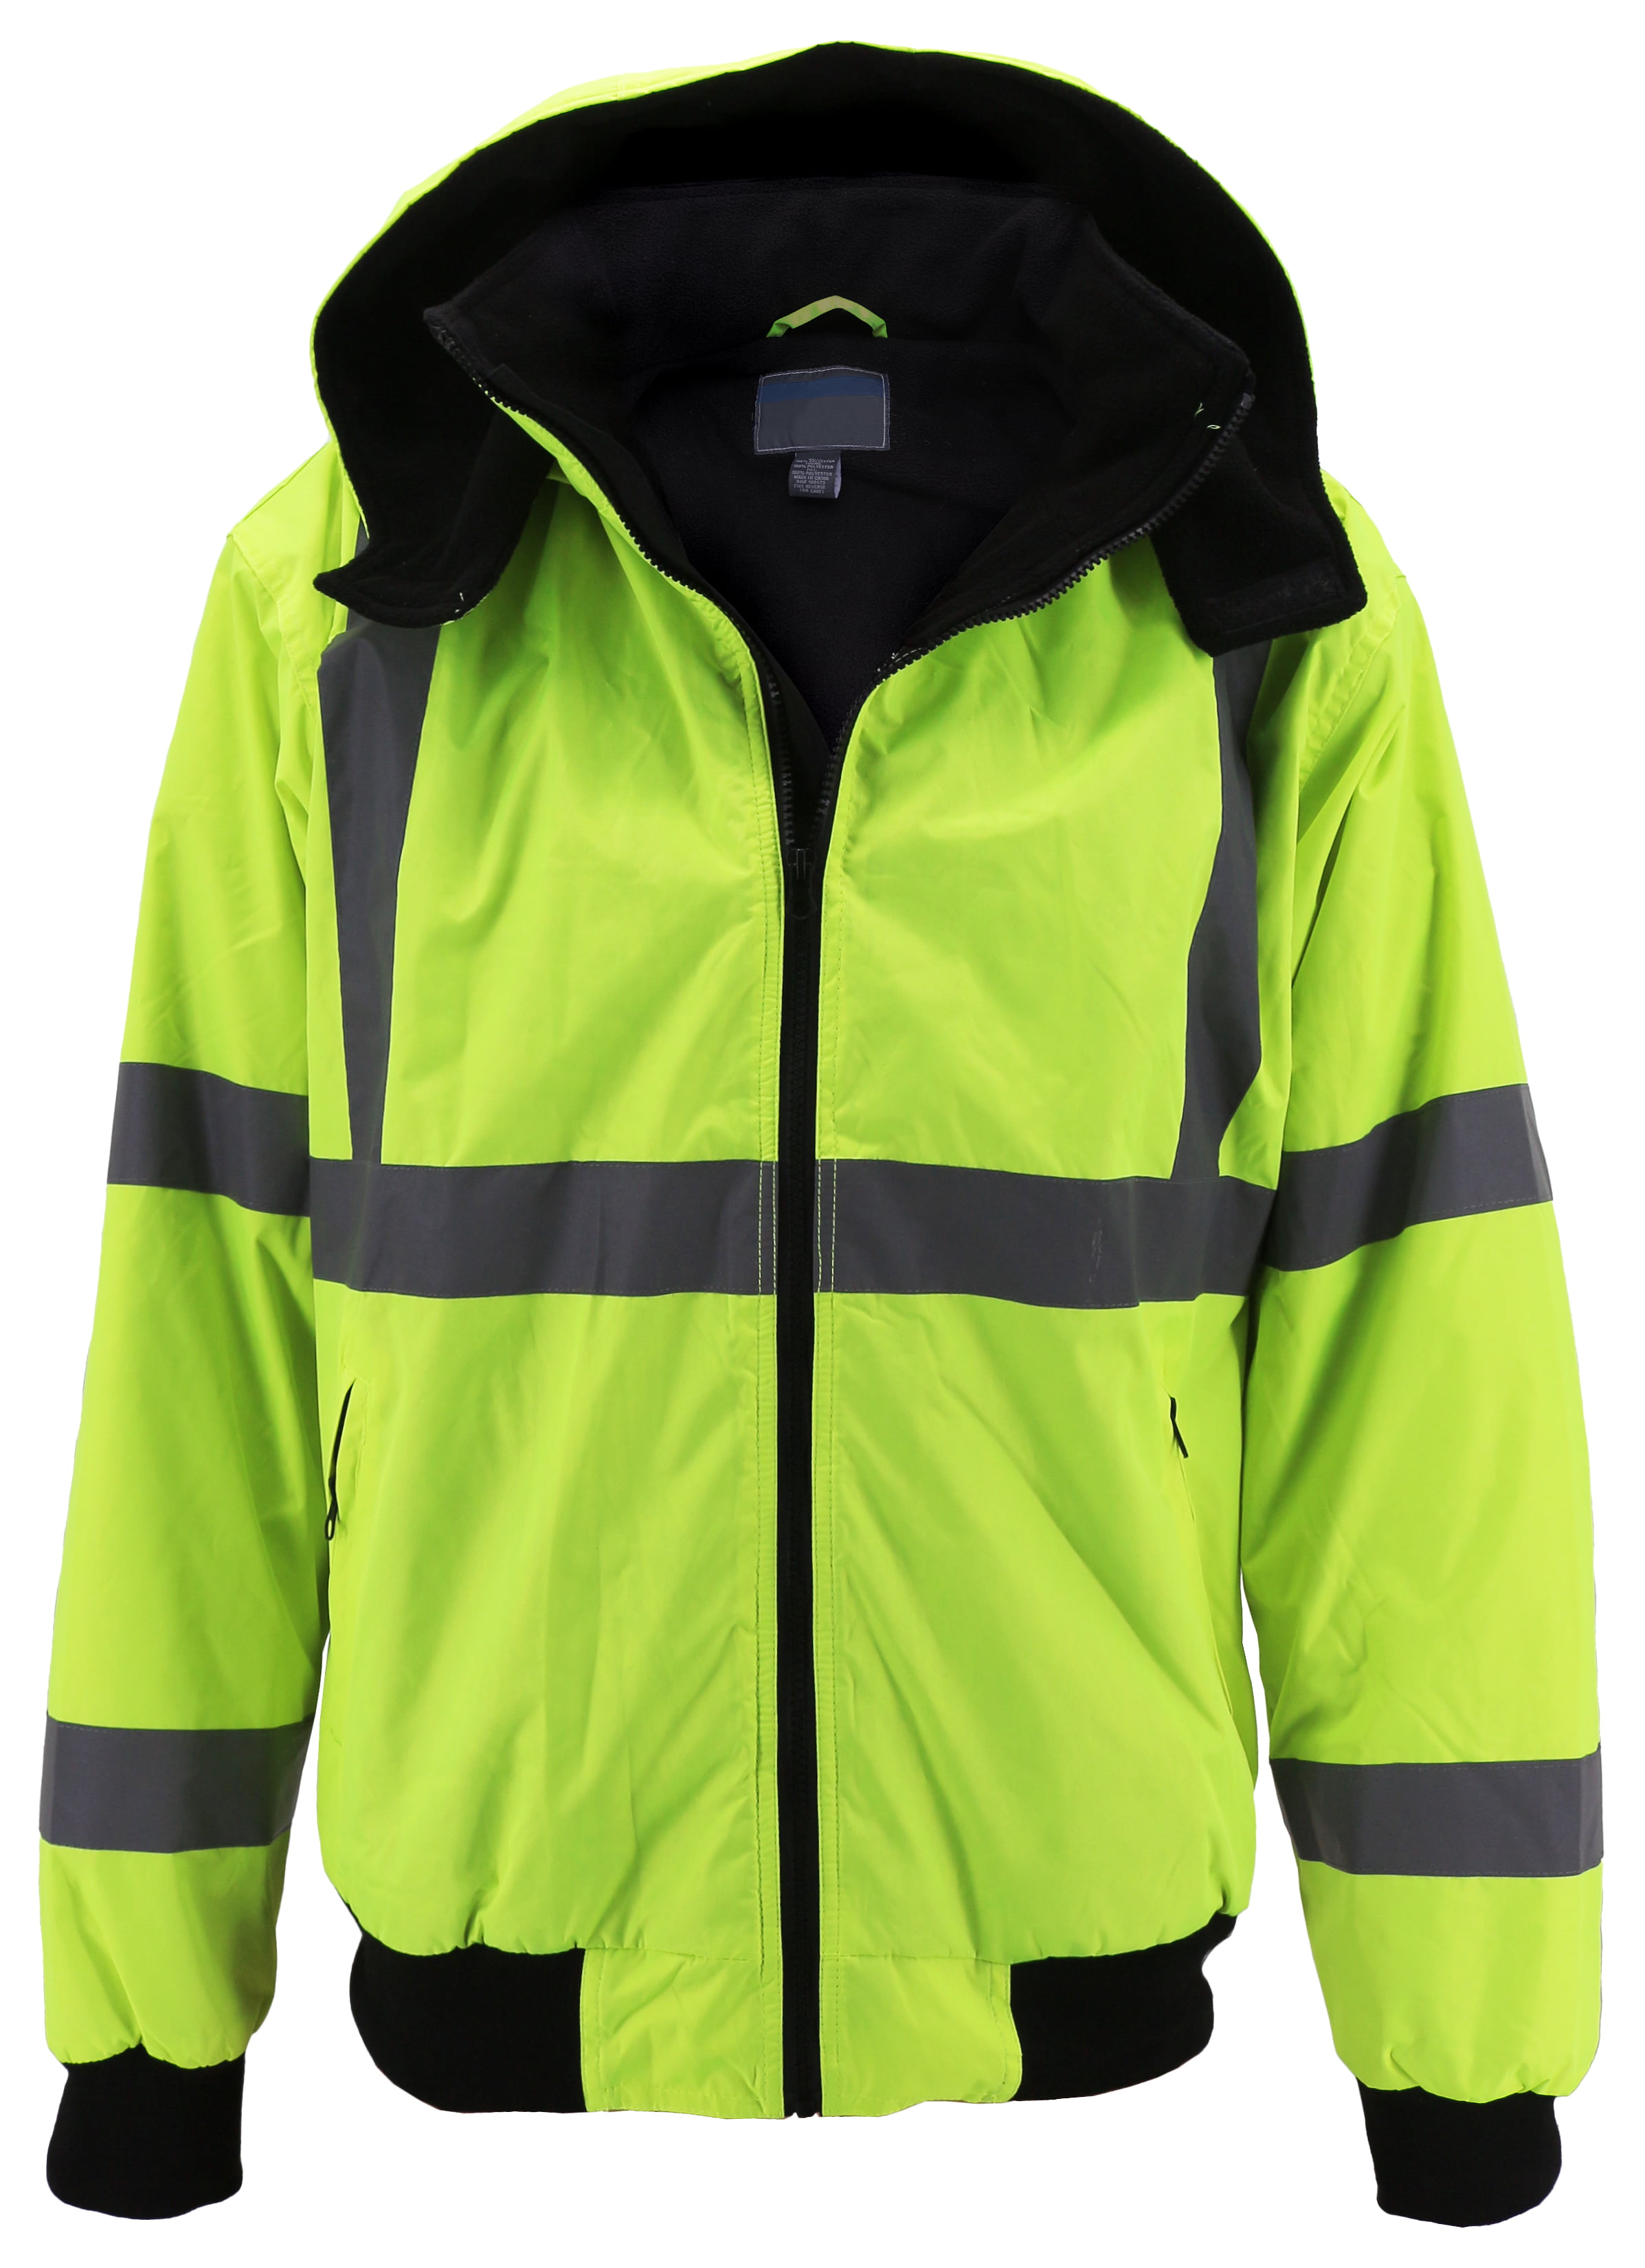 VKWEAR - Men's Class 3 Safety High Visibility Water Resistant